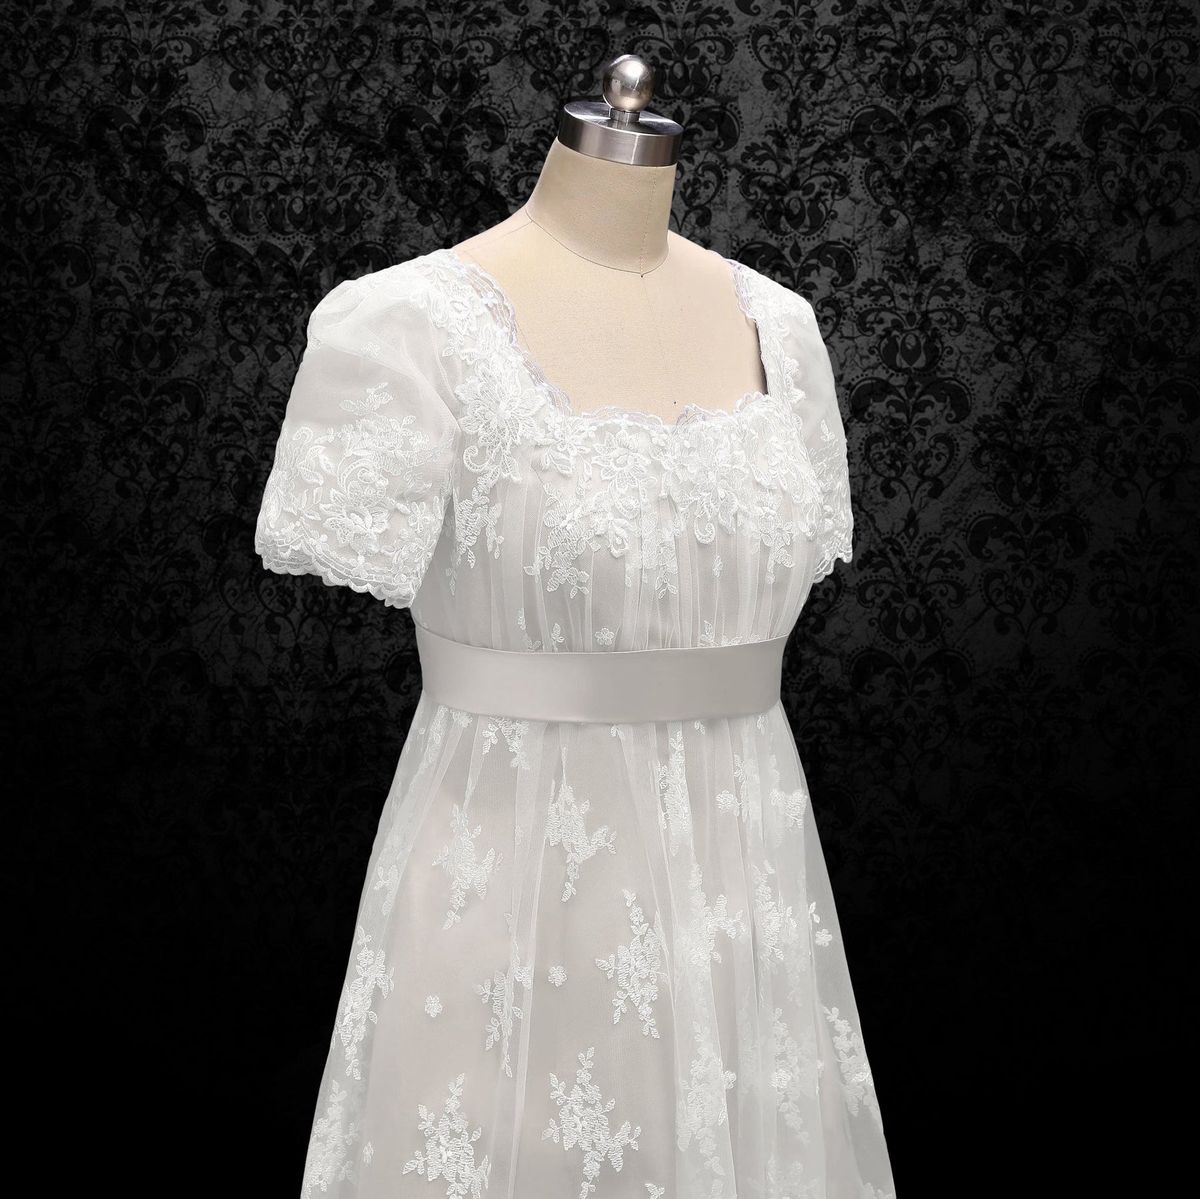 Wonderland By Lilian Plus Size 20 Prom Lace White A-line Dress on Queenly